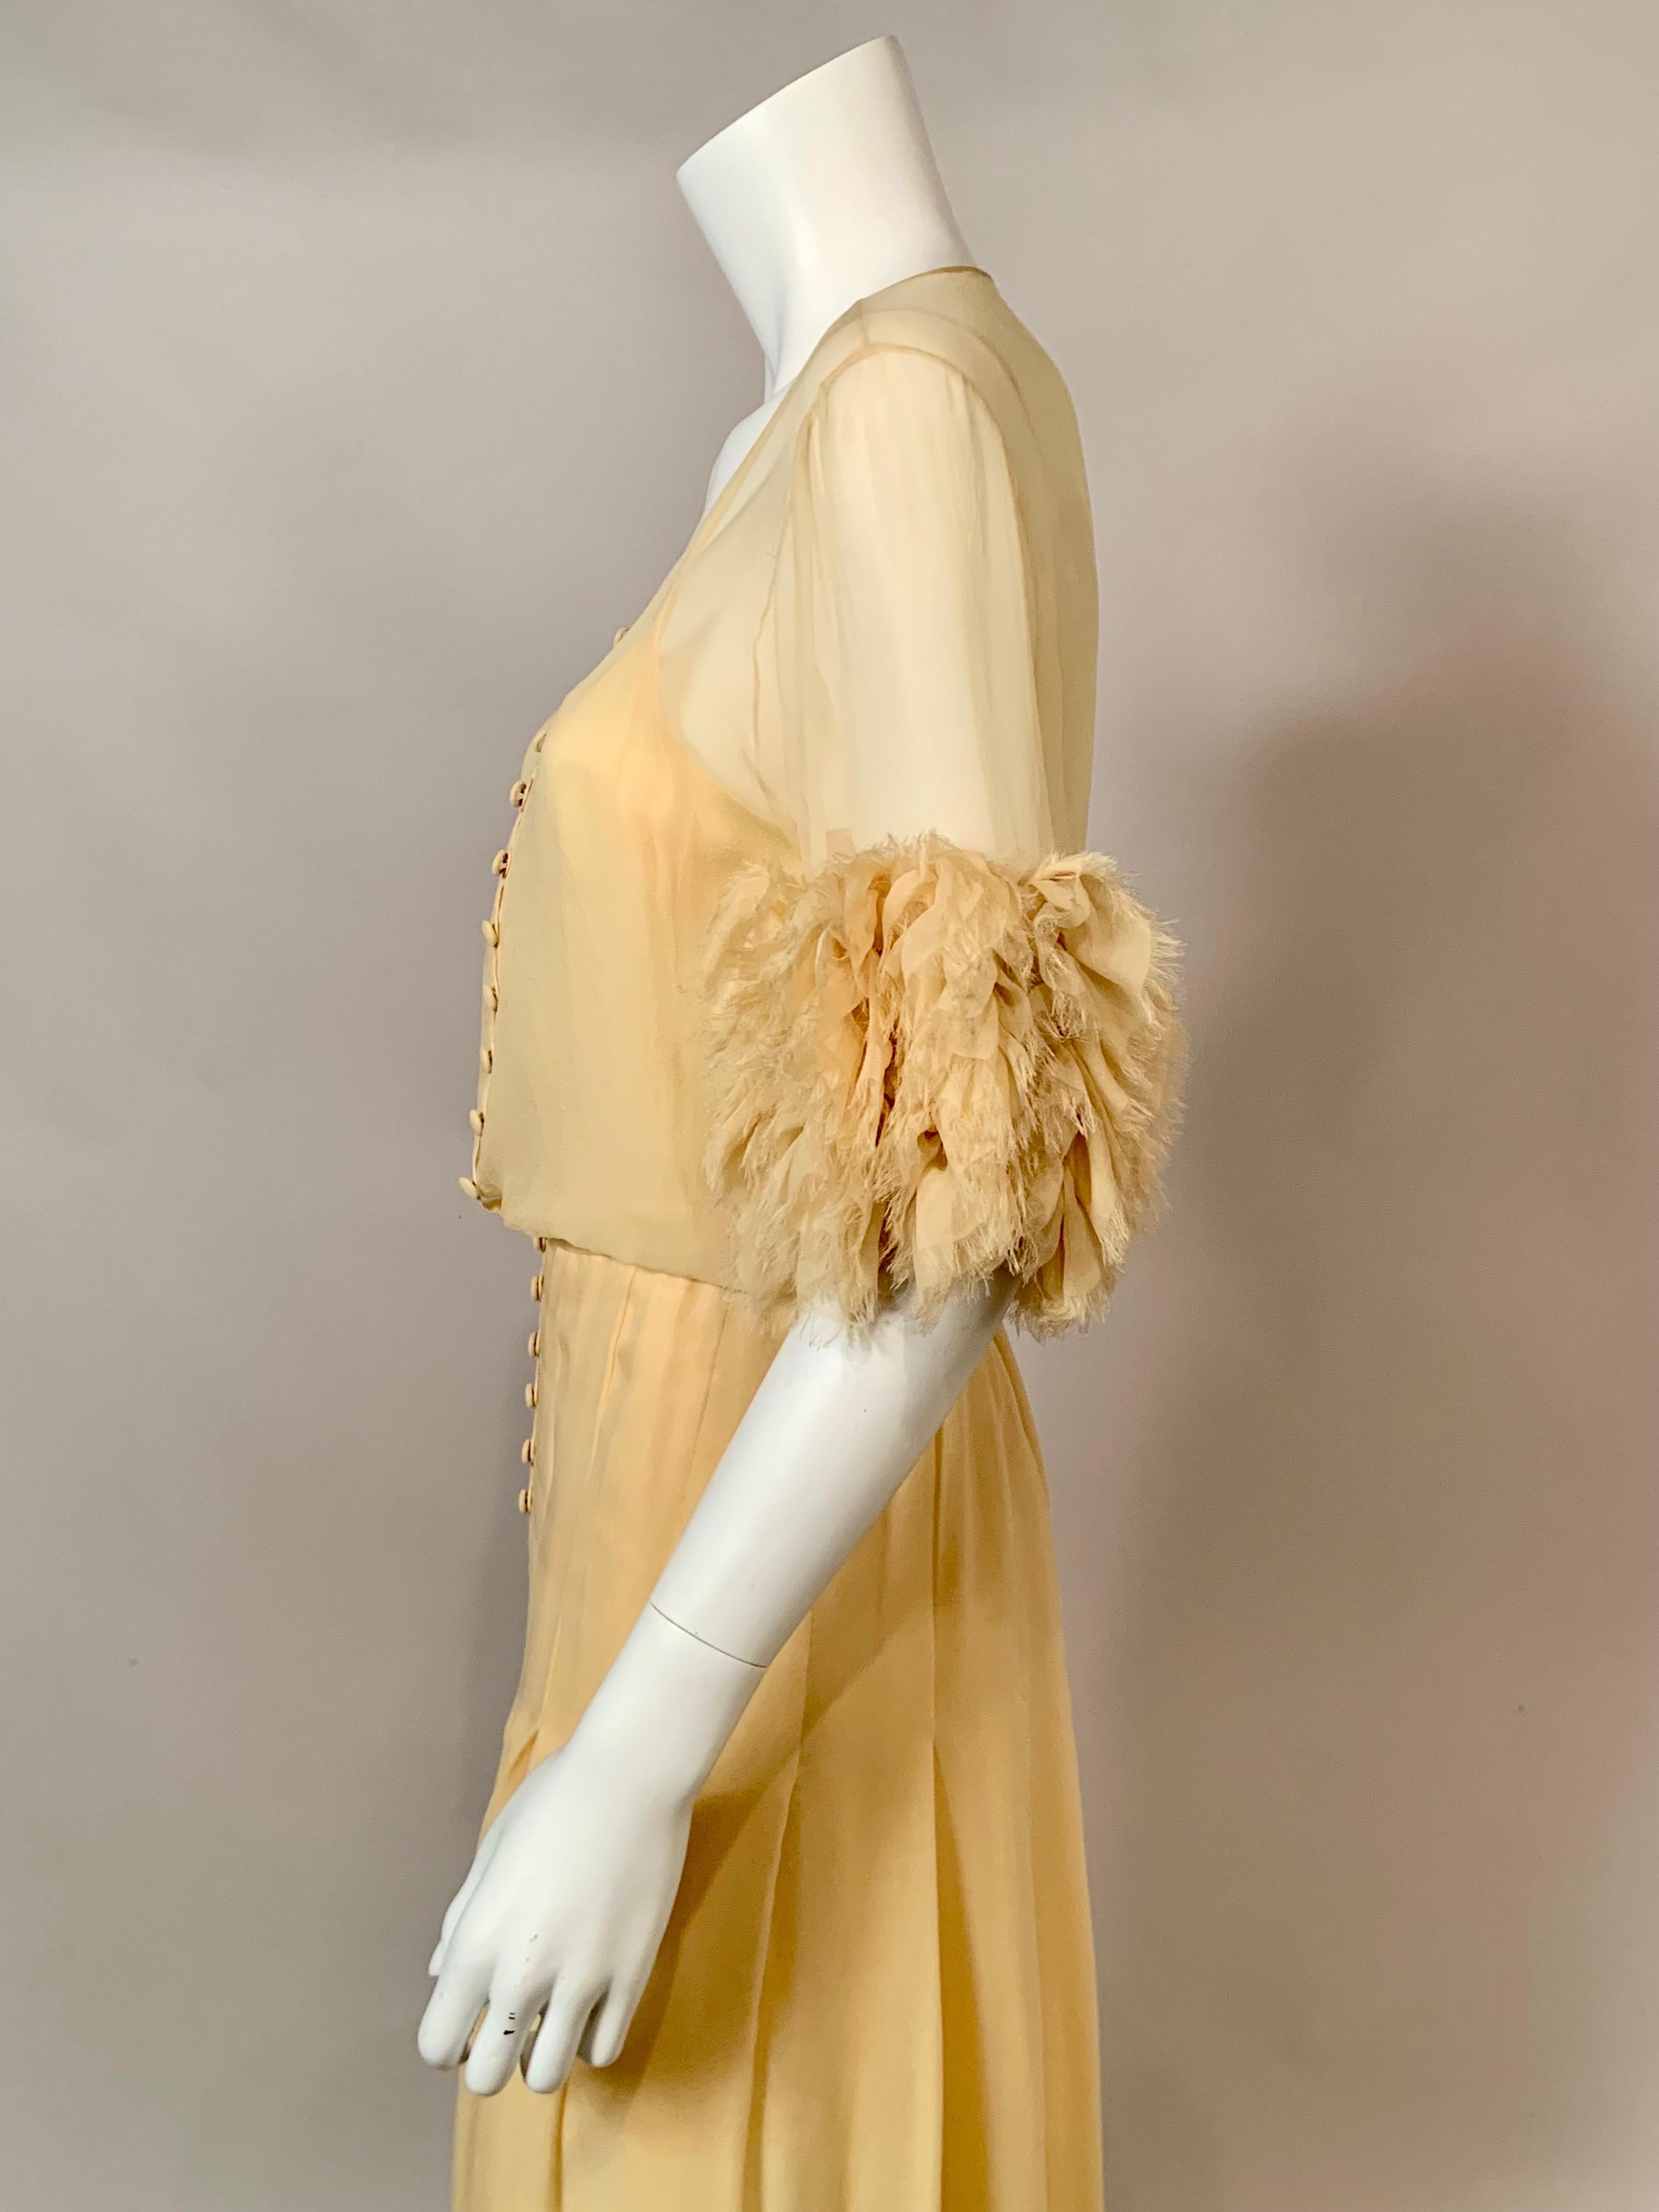 1984 Chanel by Karl Lagerfeld Butter Yellow Silk Chiffon Evening Gown Never Worn 5